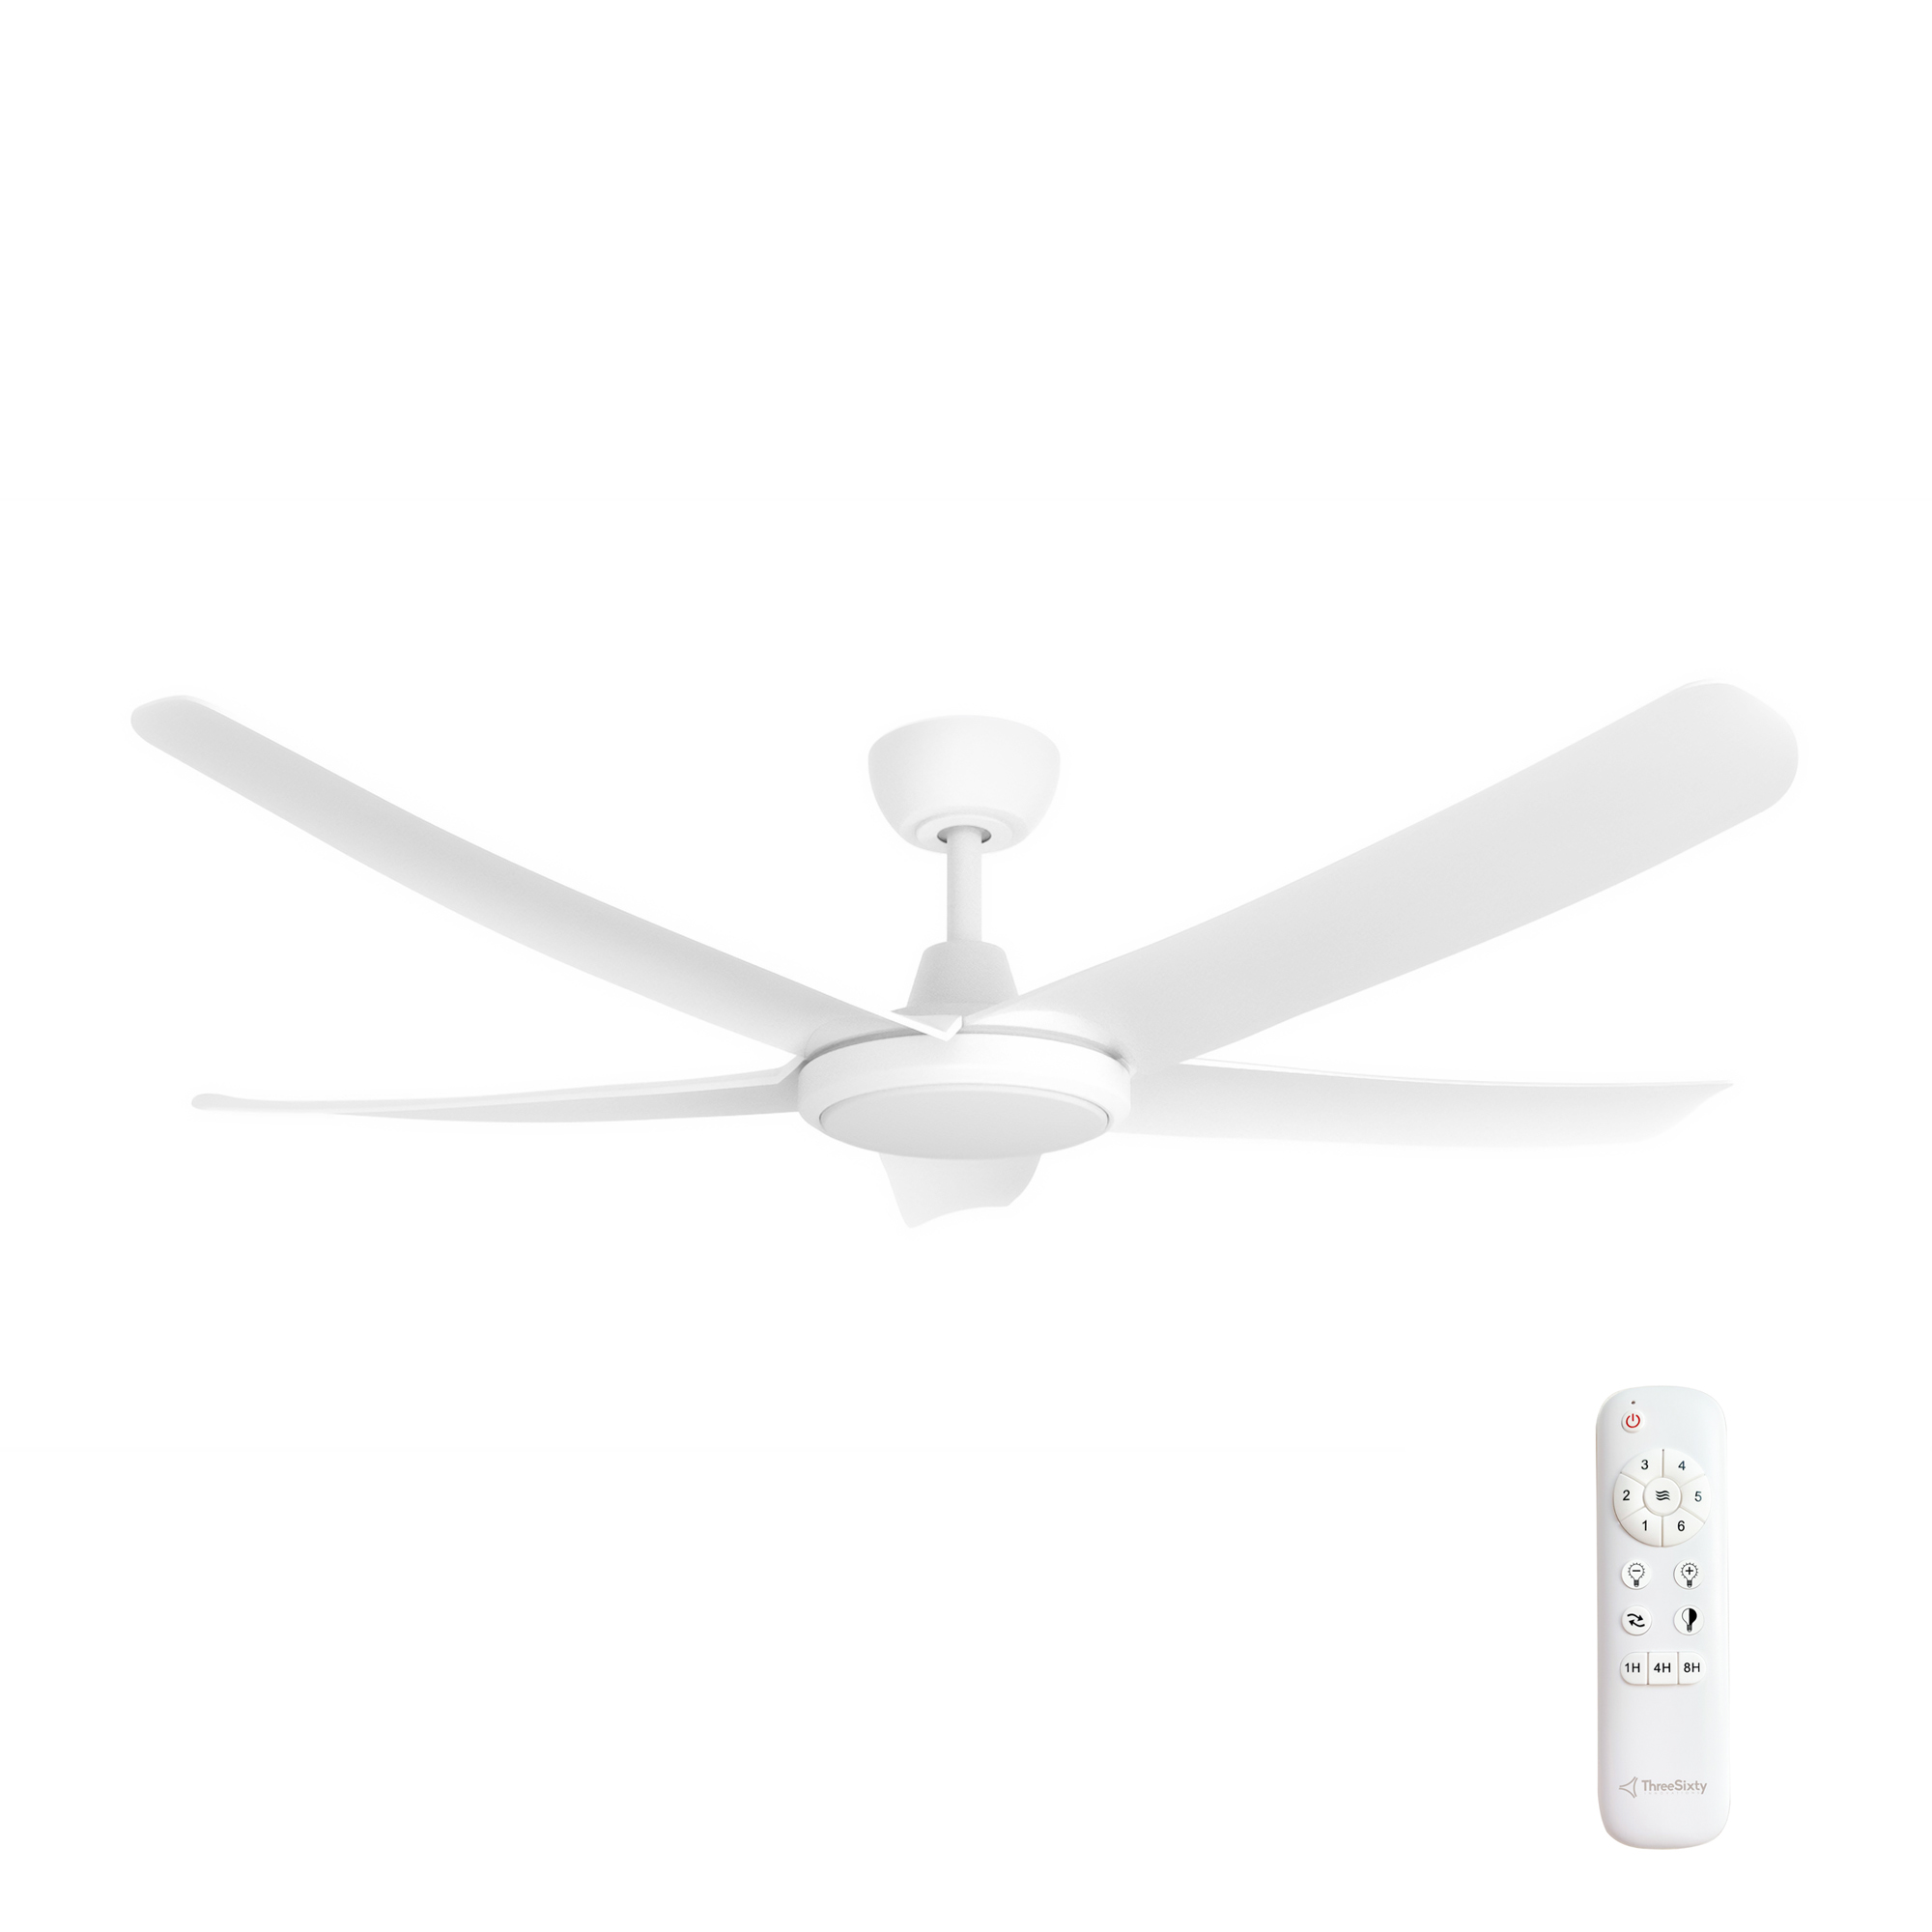 52" FlatJET DC Ceiling Fan in Matte White with 24W Dimmable CCT LED Light (5 Blades)